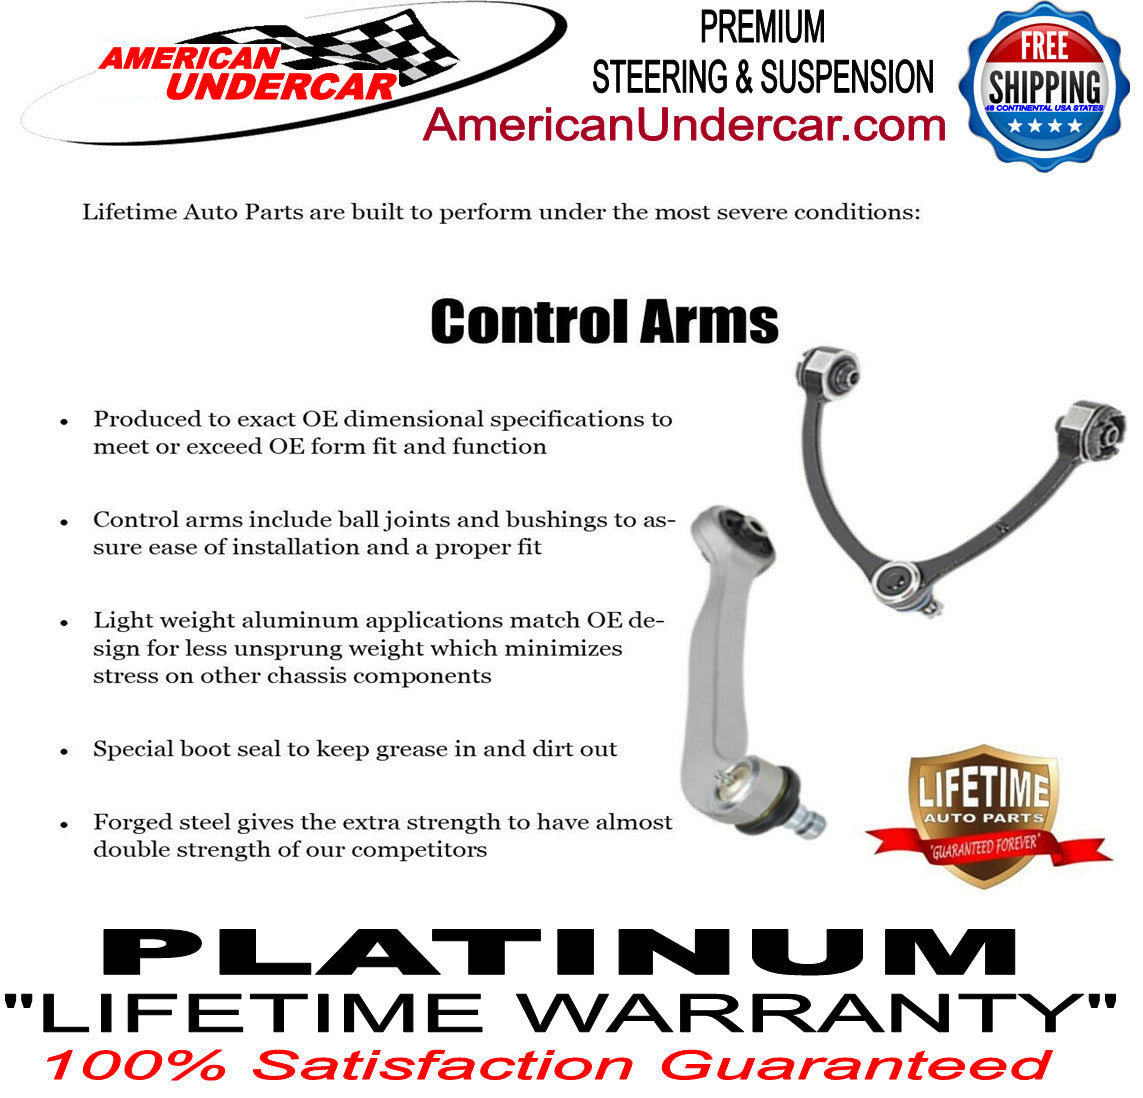 Lifetime Ball Joint Tie Rod Drag Link Kit for 1985-1994 Ford F250 4x4 3850lb Axle